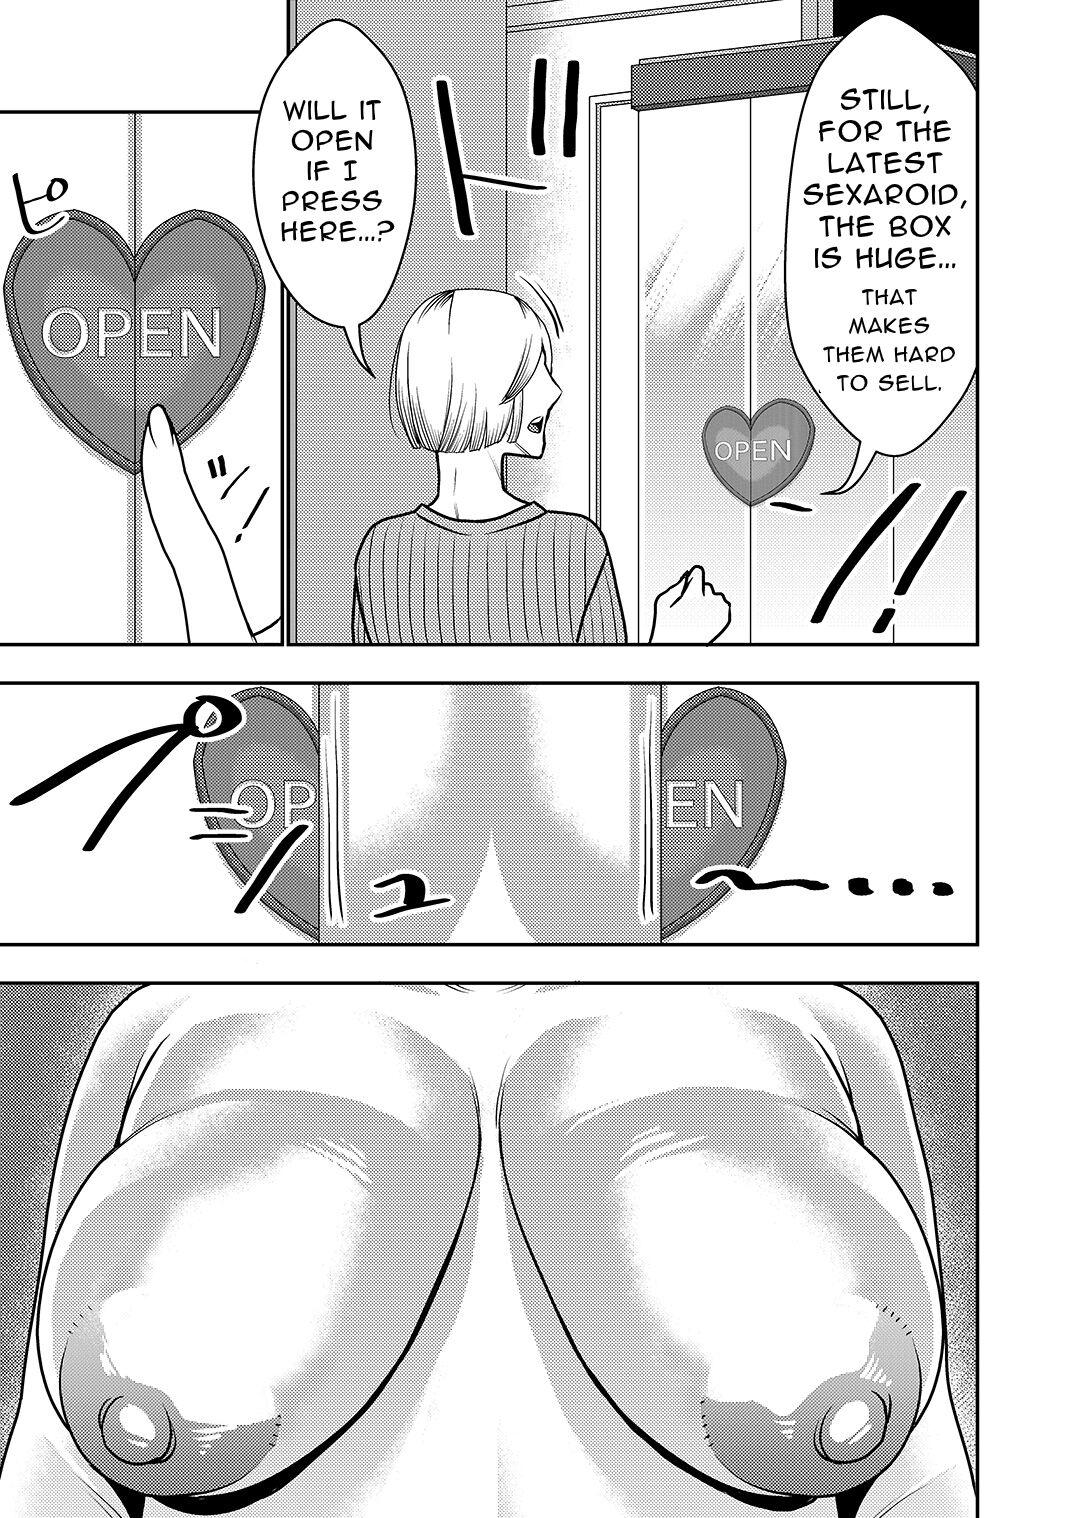 Rough Sex This Defective Sexaroid is TOO LEWD, so I'm thinking of returning it! - Original Amature Allure - Page 3